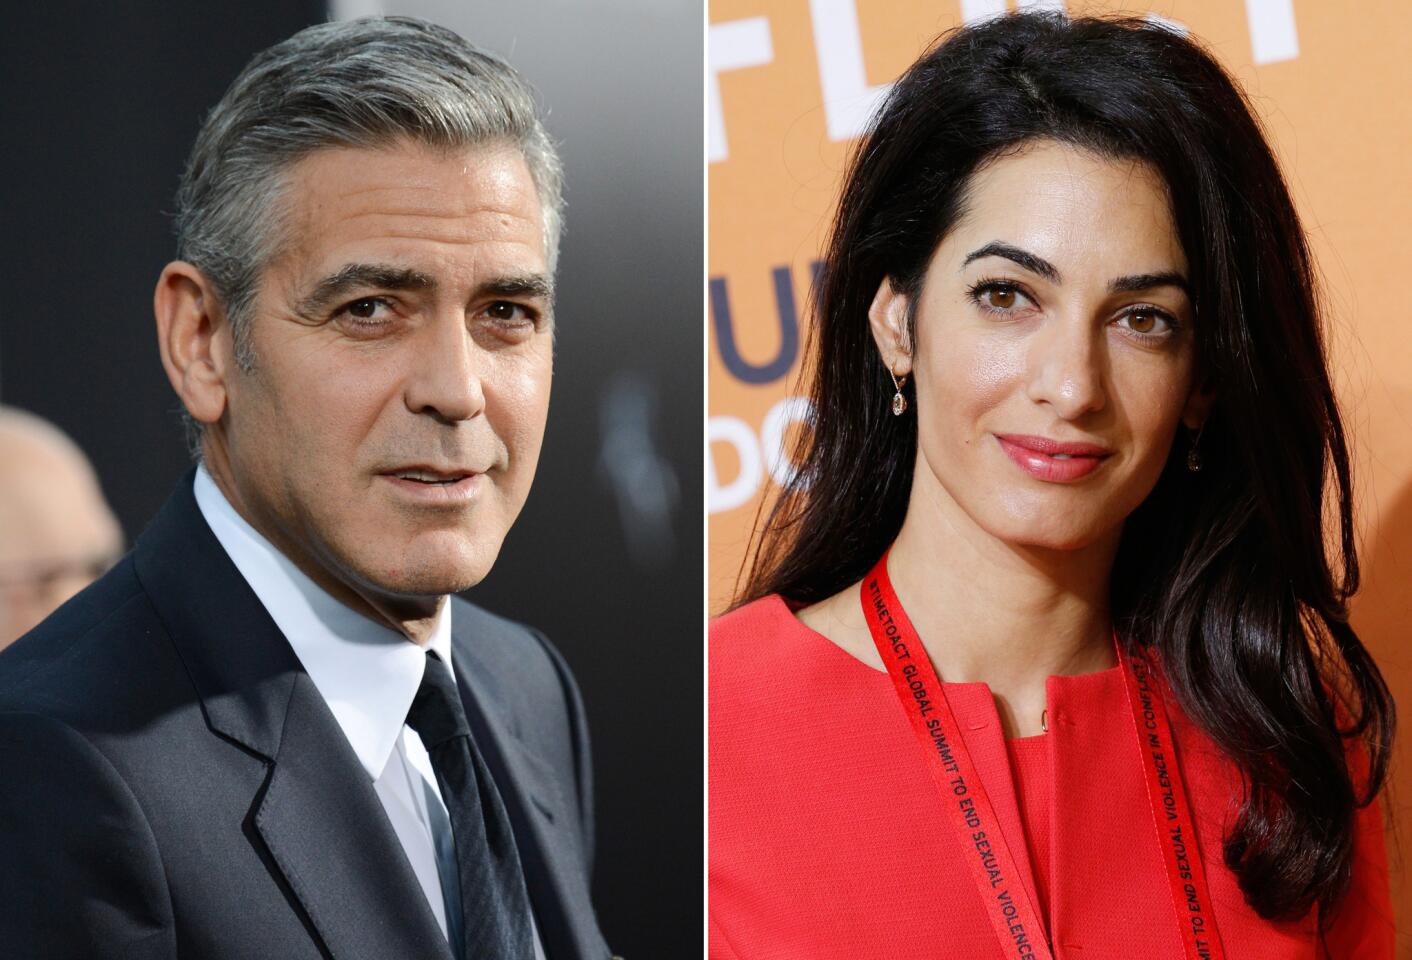 The Mail Online took down a story alleging Baria Alamuddin opposed George Clooney's upcoming marriage to her daughter, Amal, for religious reasons -- but only after Clooney released a statement slamming what he called a "completely fabricated" piece. An apology didn't win him over.